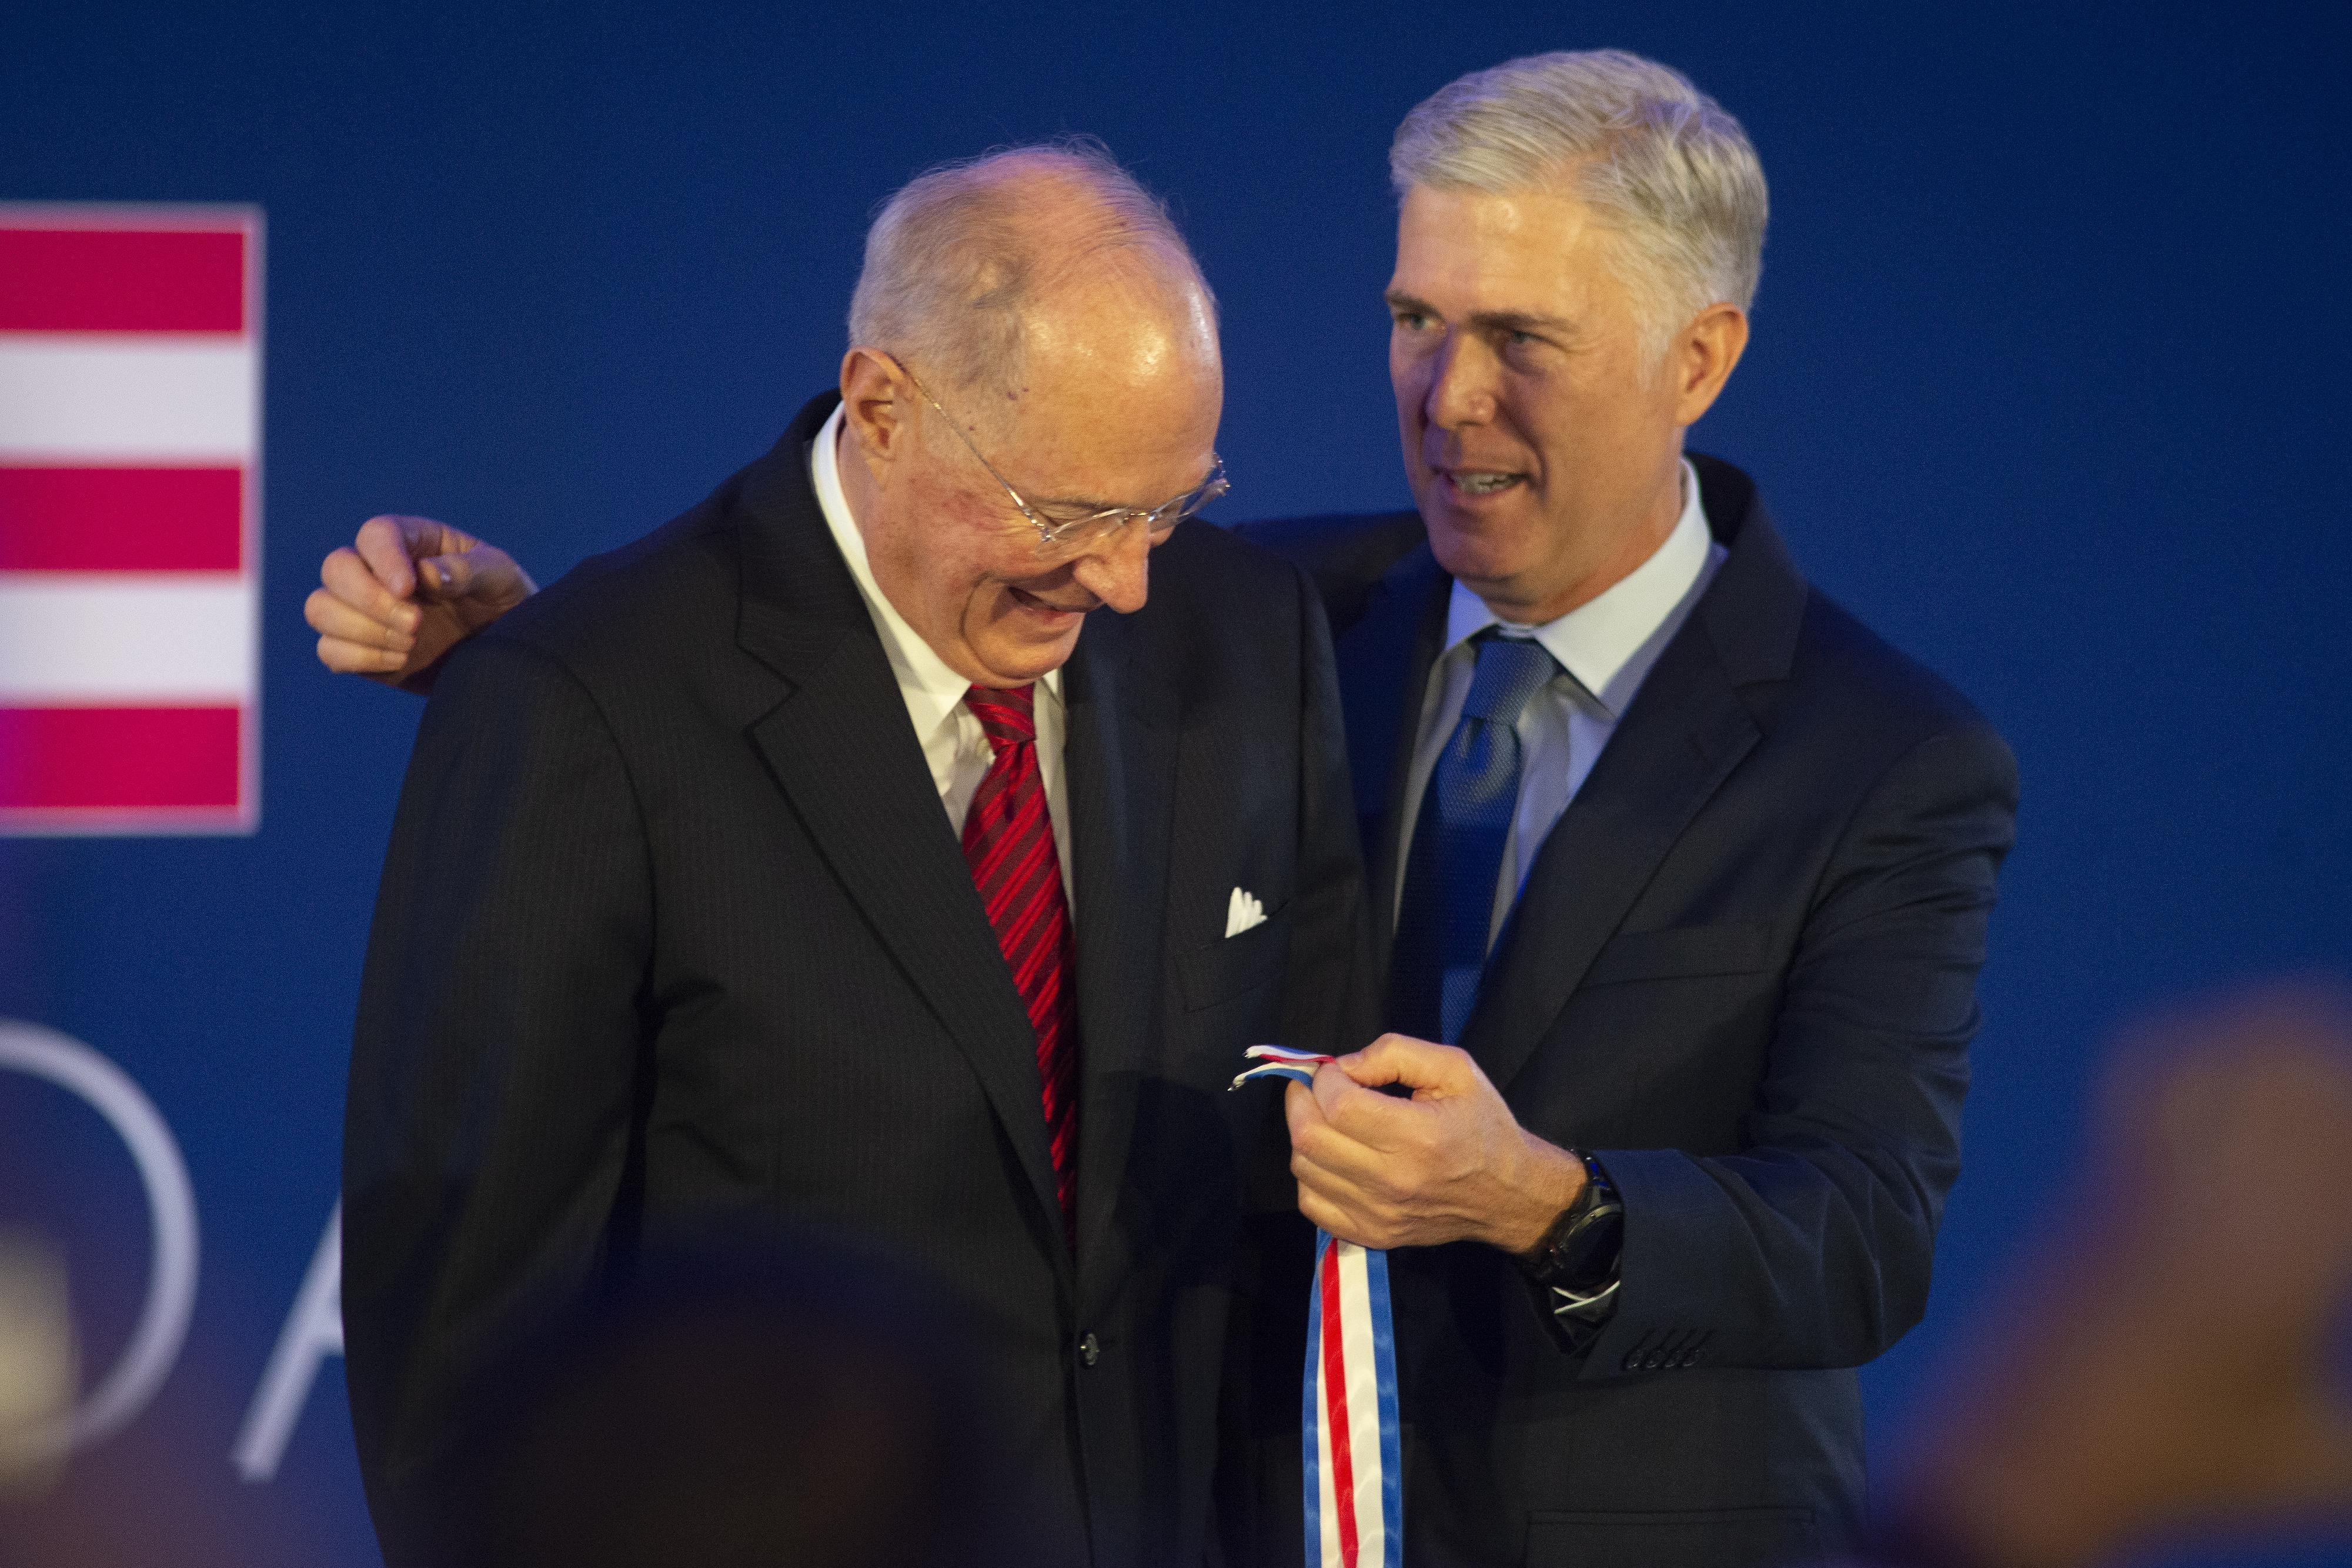 Justice Neil Gorsuch puts the Liberty Medal around retired Justice Anthony Kennedy at a 2019 ceremony.